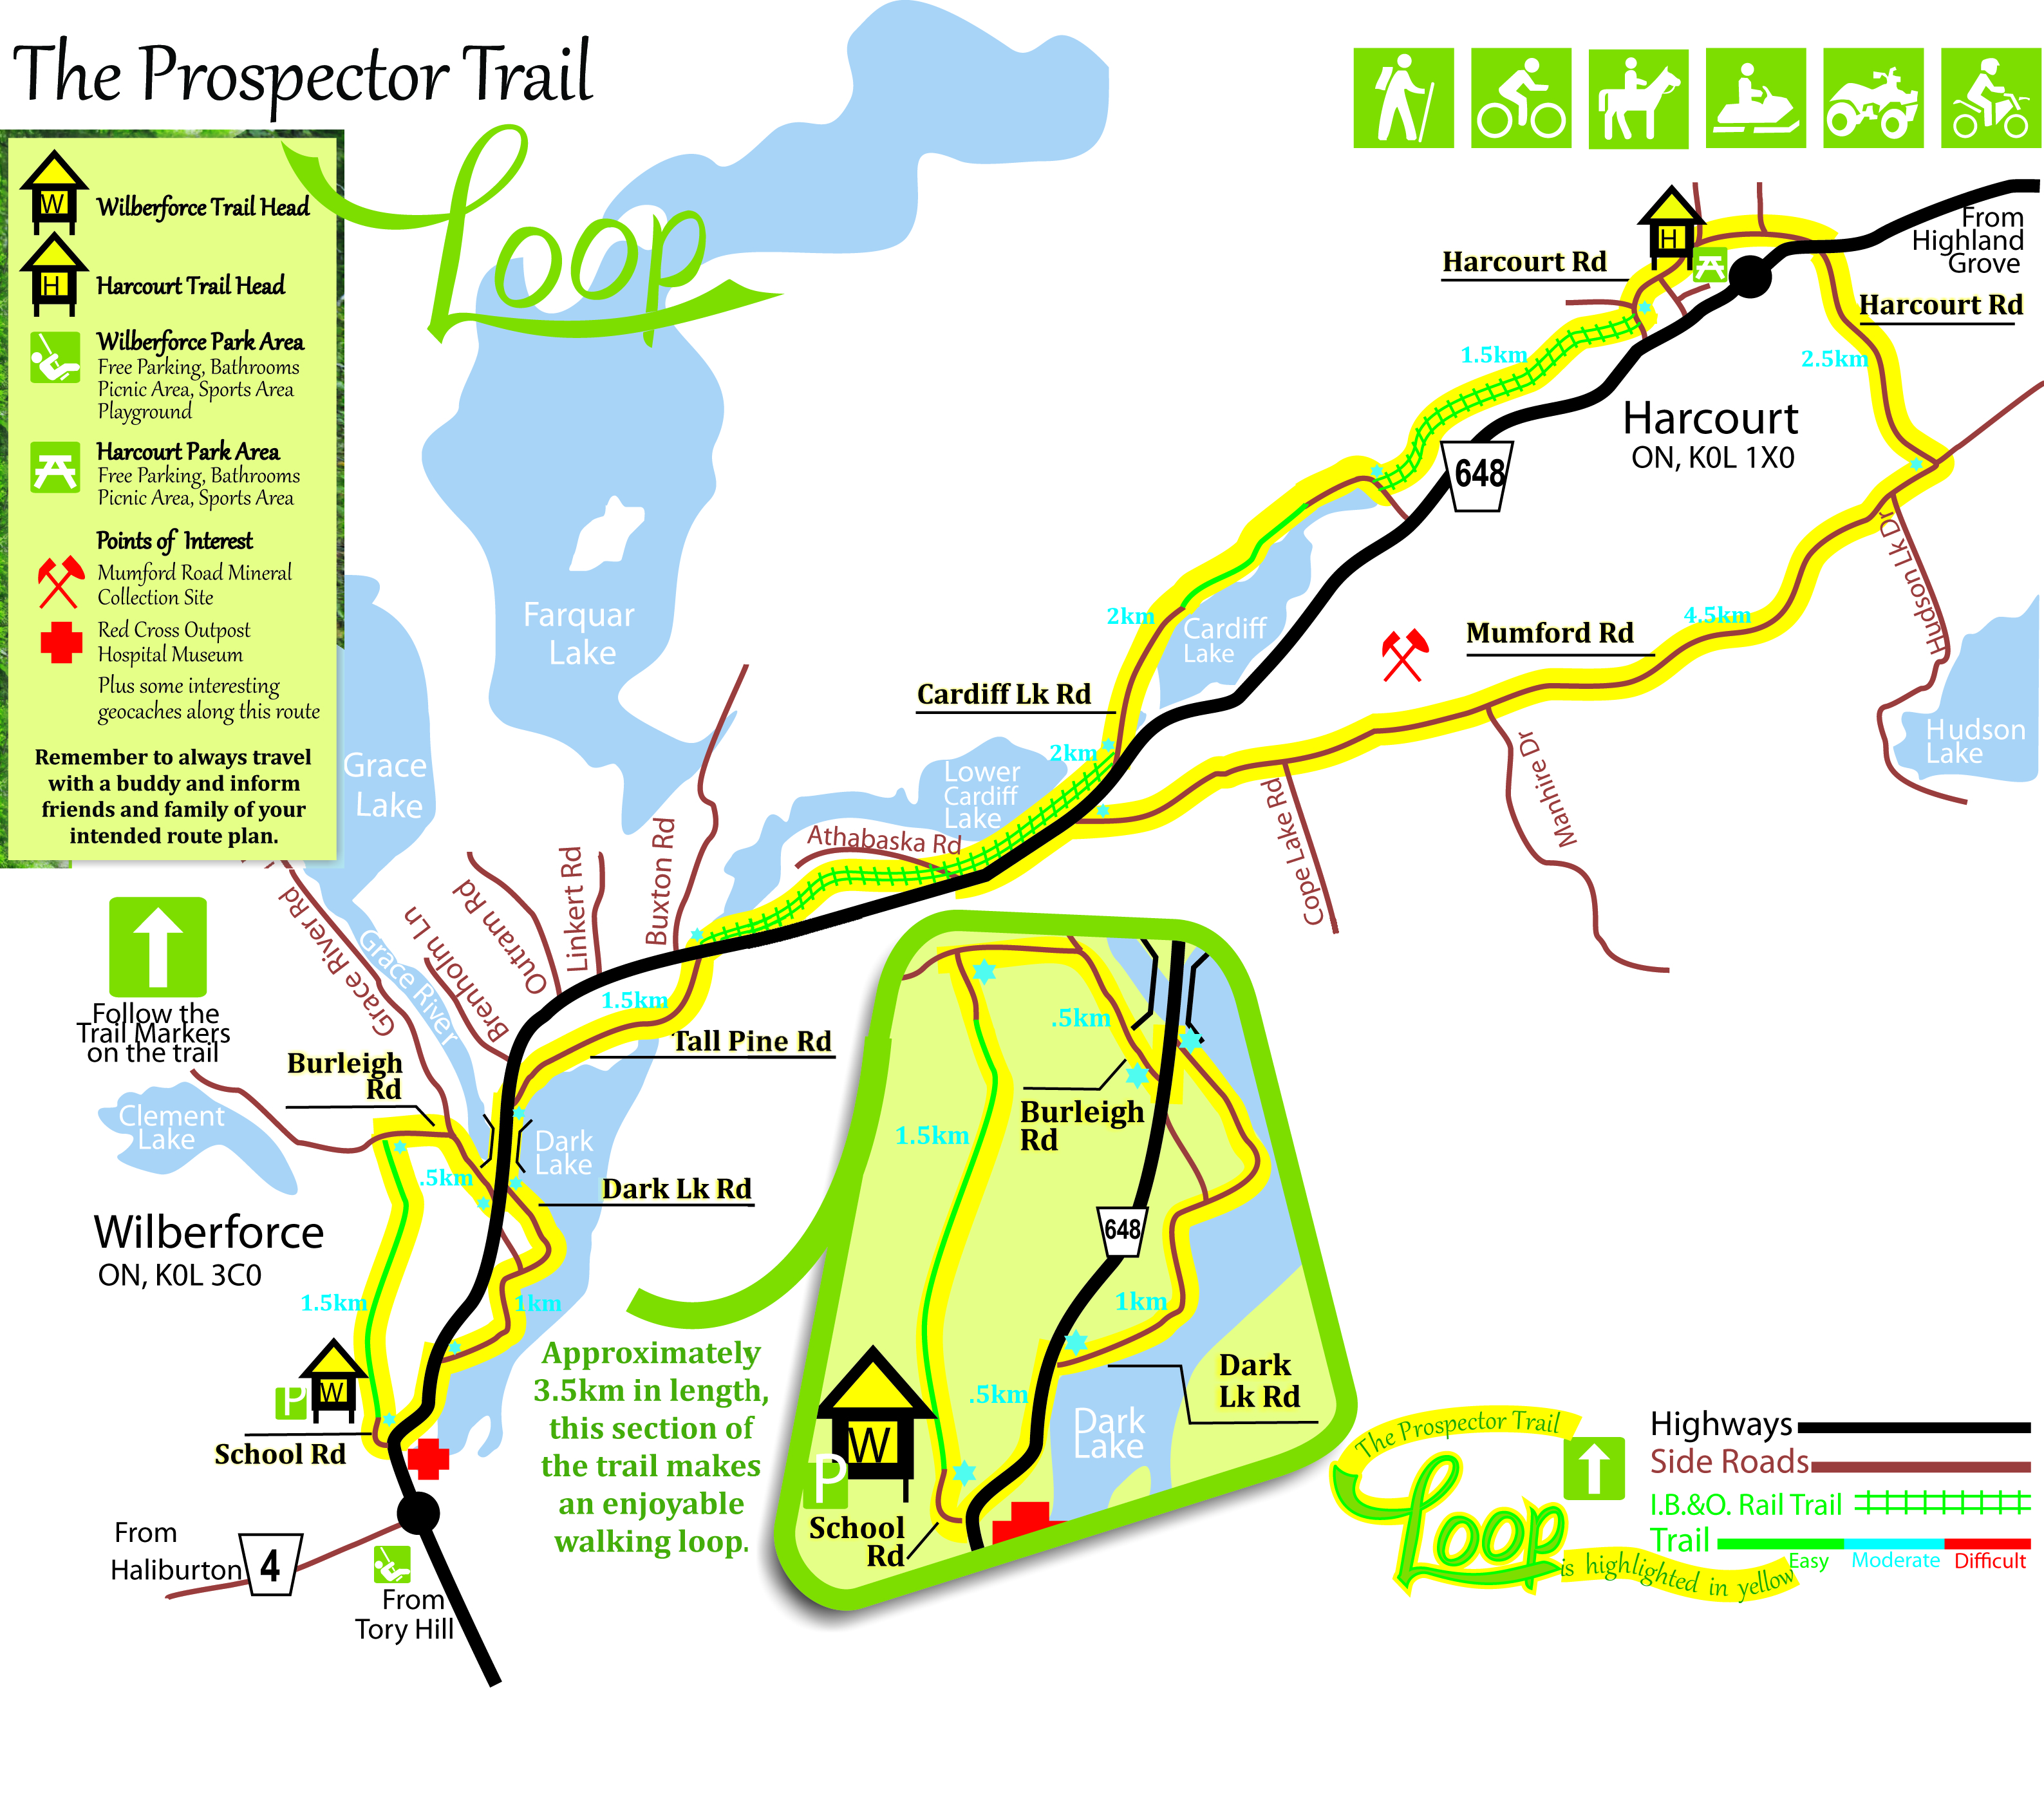 Map of Prospector Trail